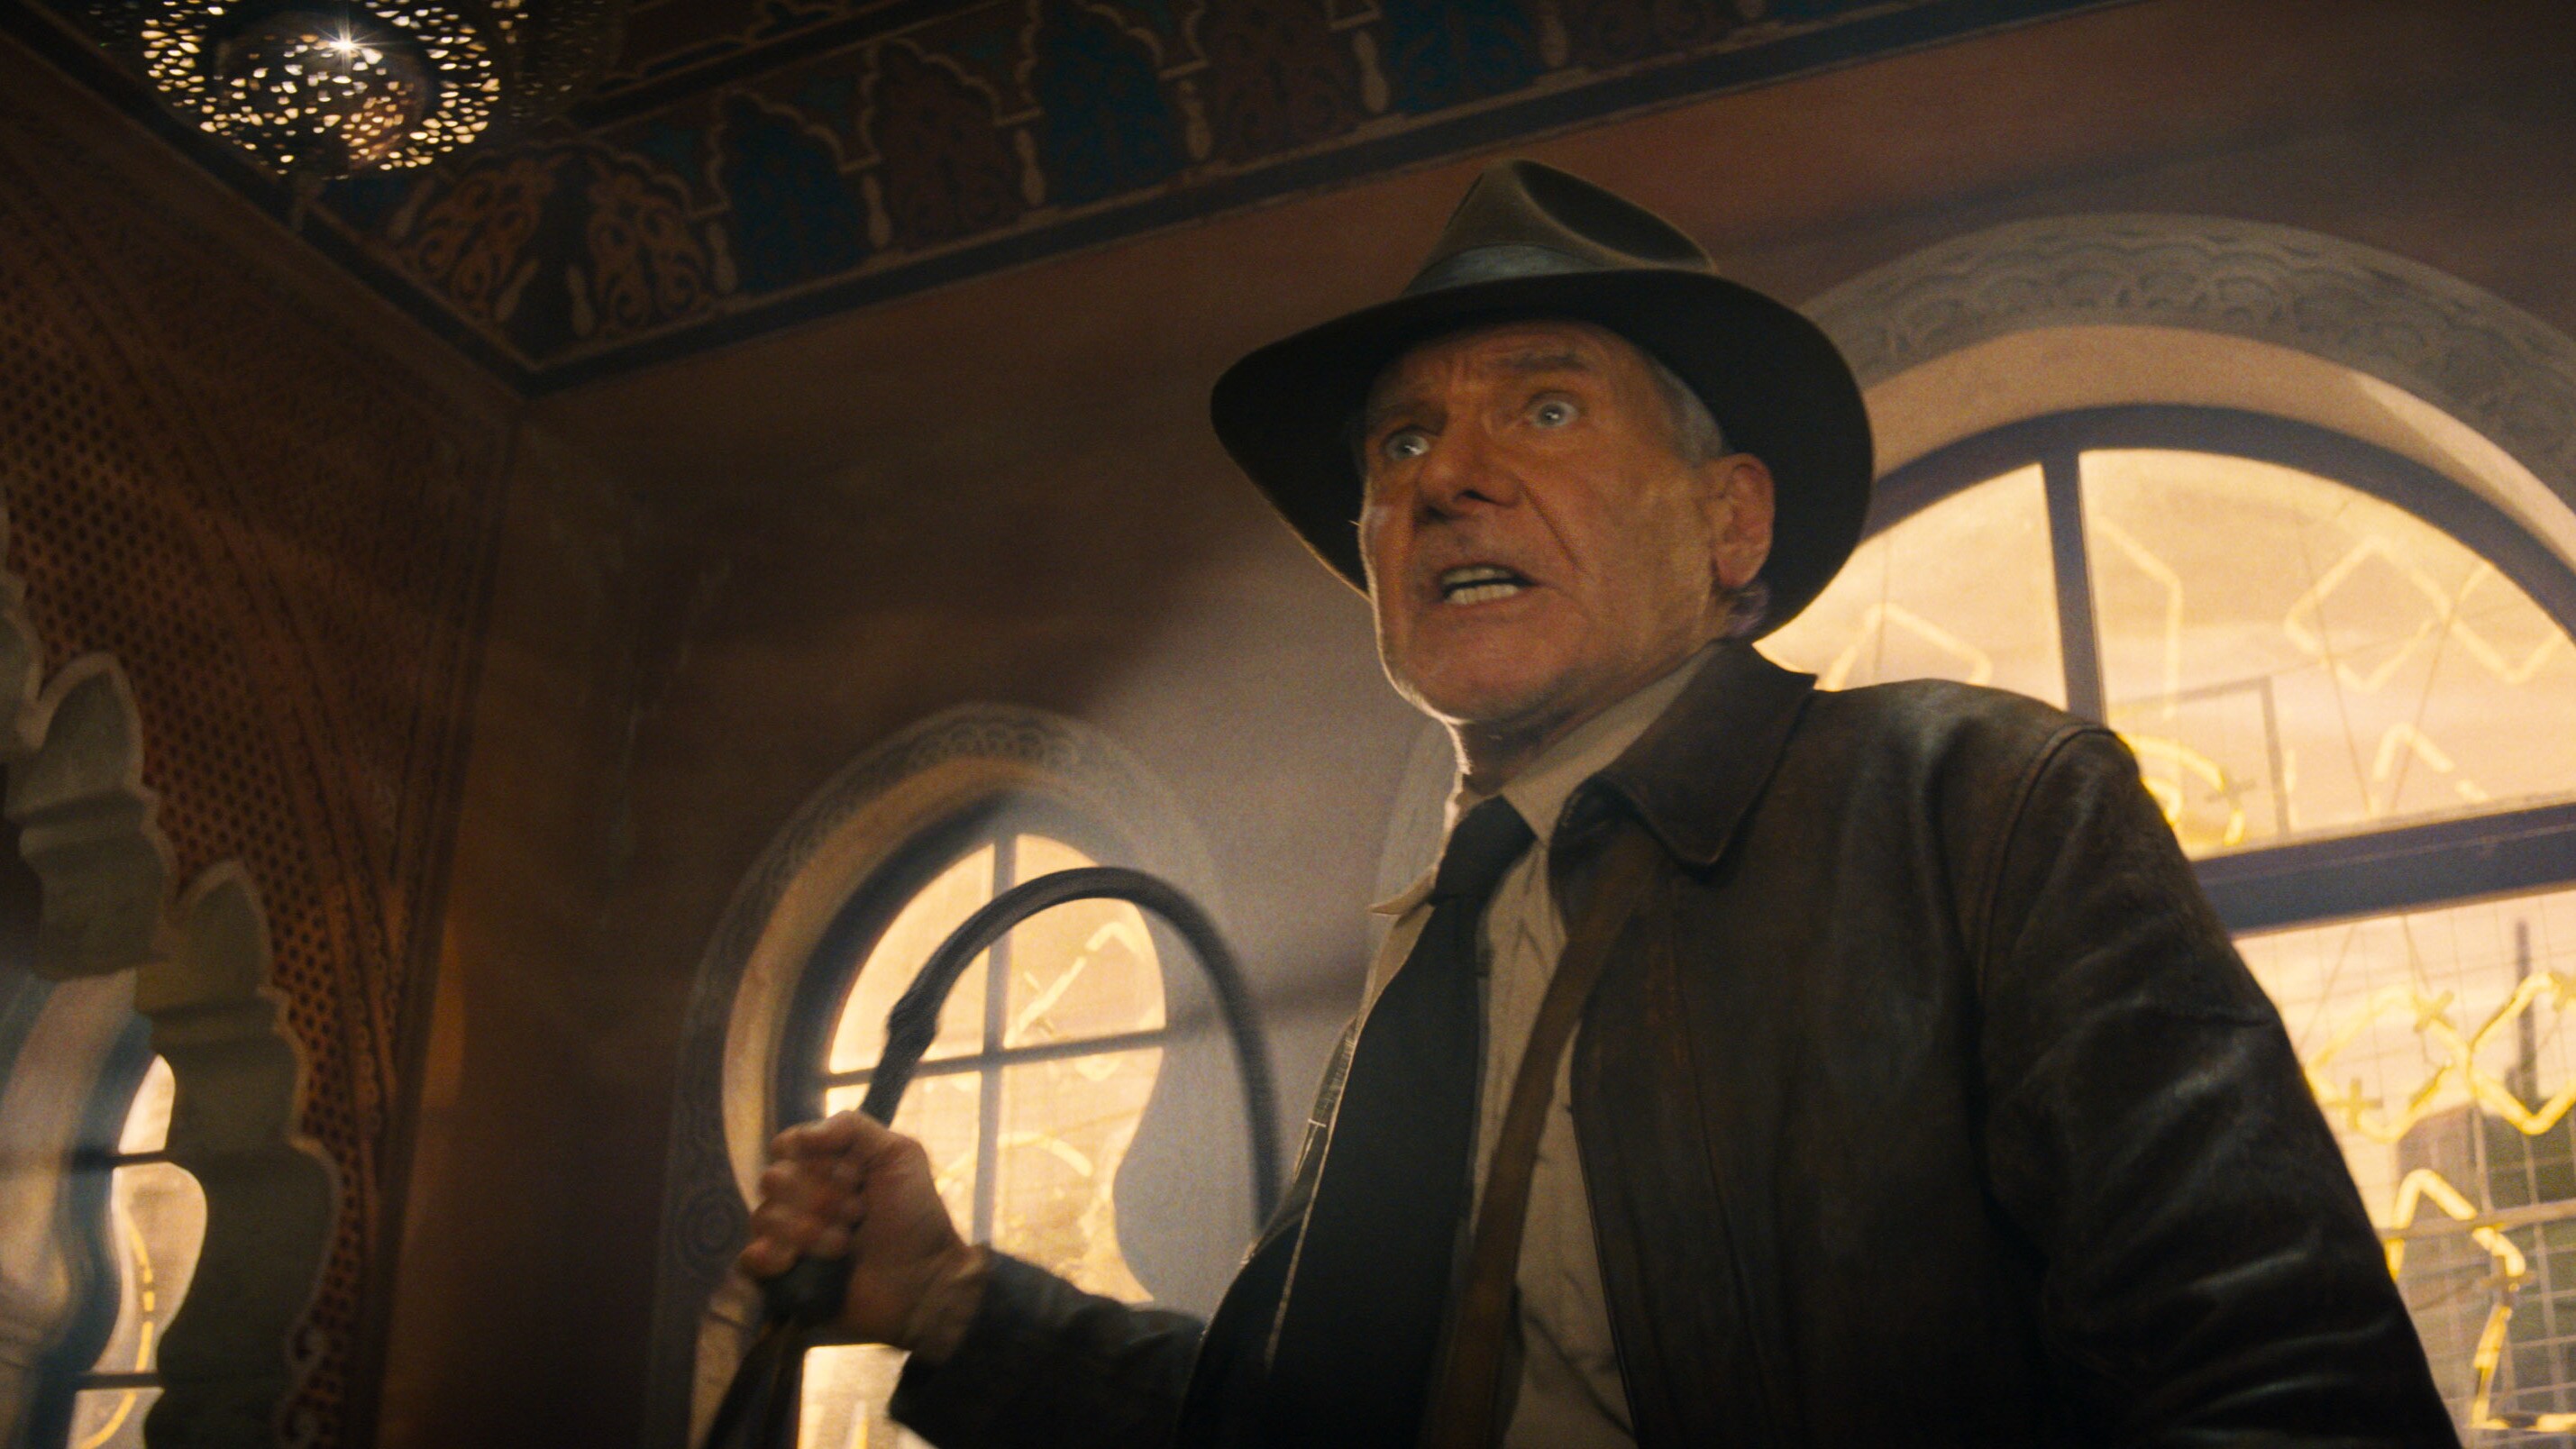 Indiana Jones holding a whip.